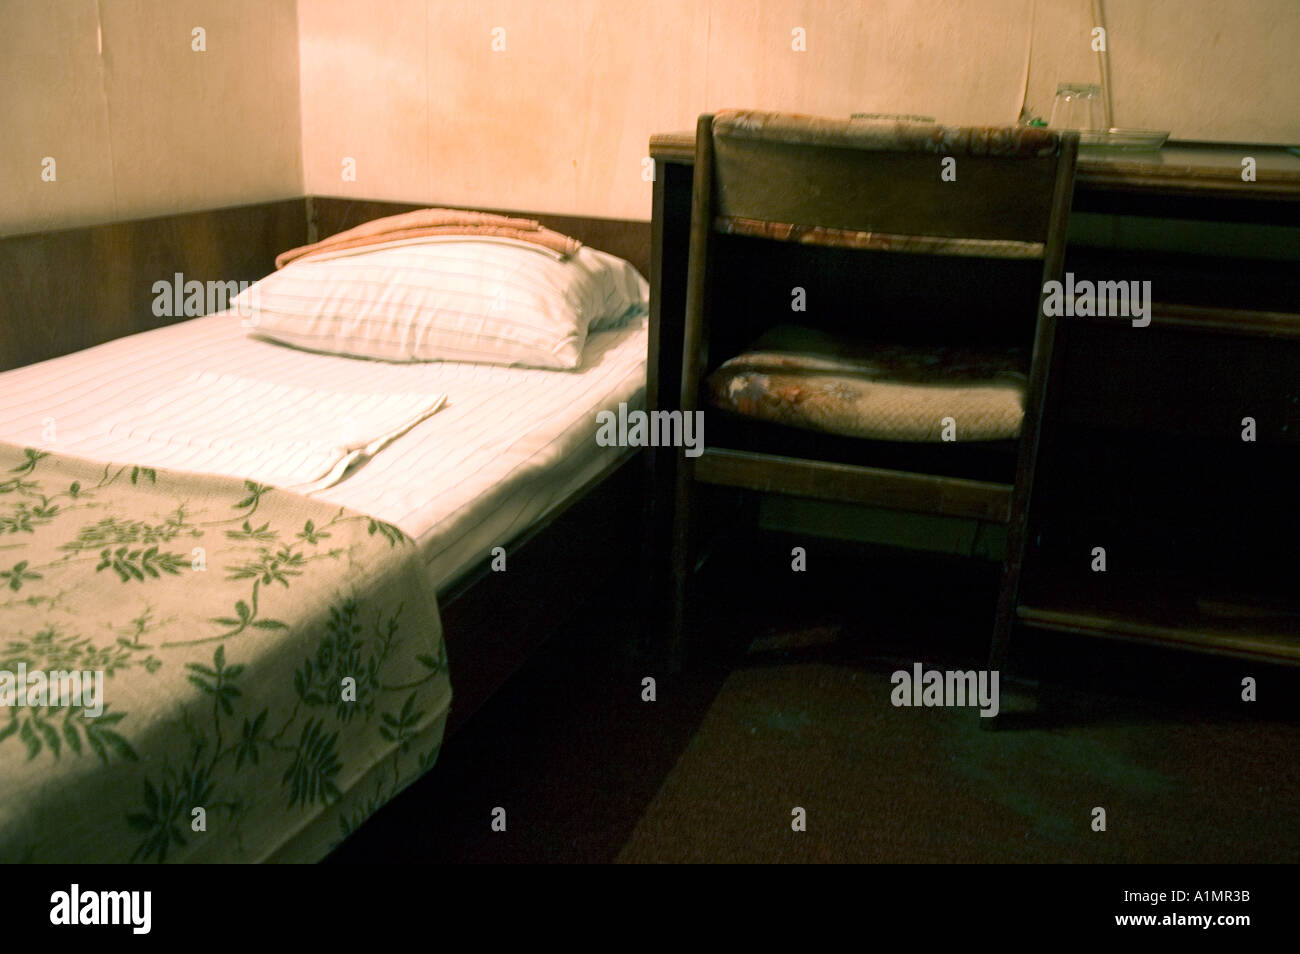 Frugal accommodation in the Minsk Hotel on Tverskaya Ulitsa in central Moscow Stock Photo